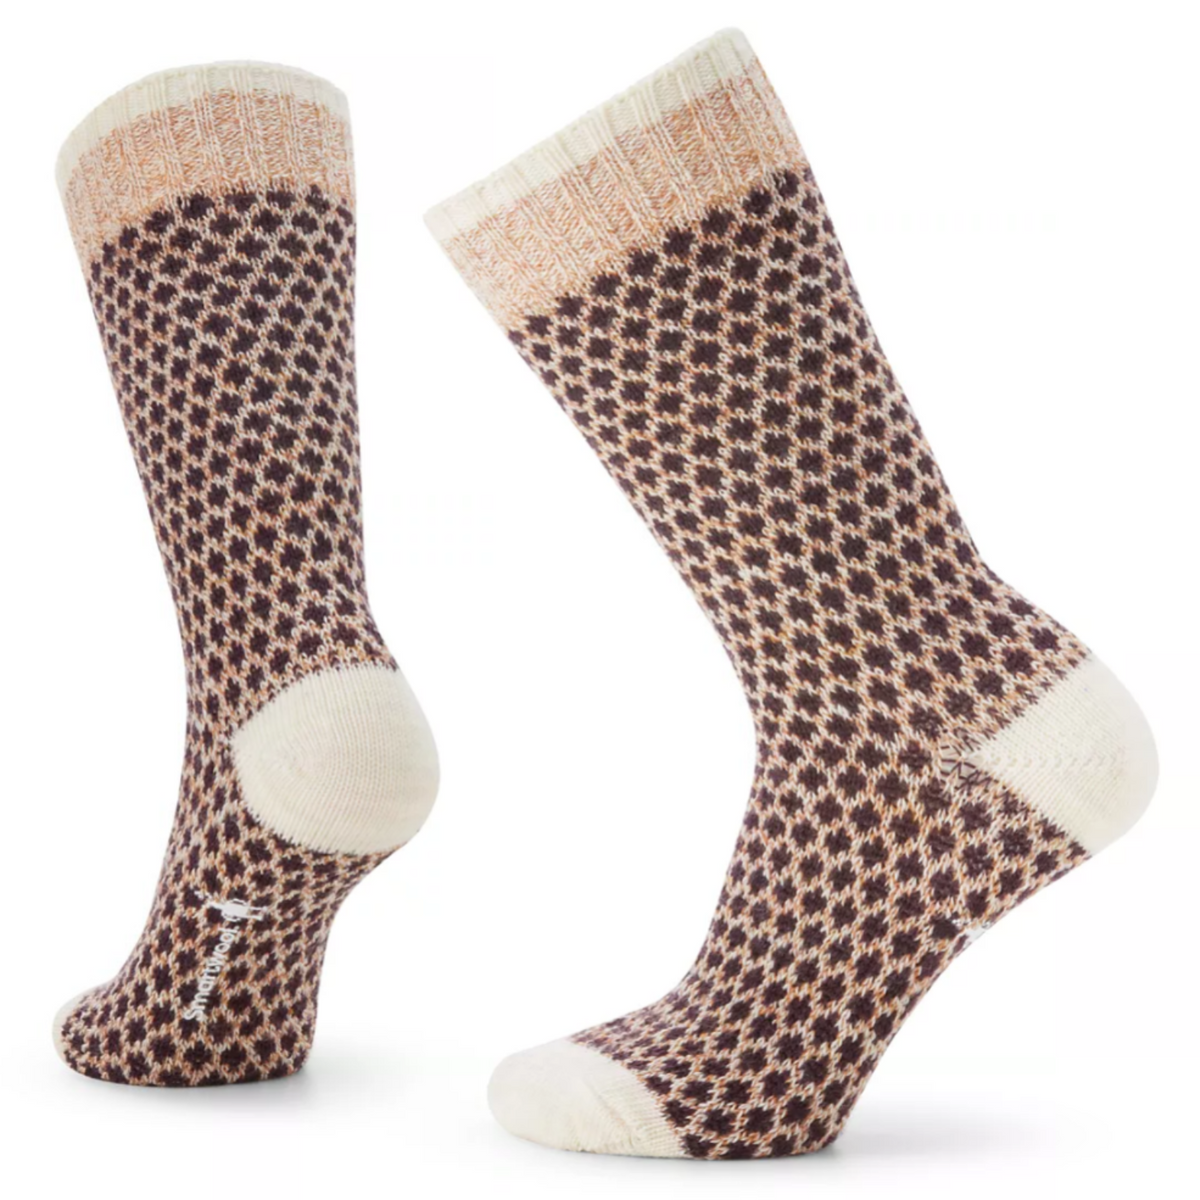 Smartwool Popcorn Polka Dot Crew women&#39;s sock featuring white and brown pattern all over with white toes and heel. Socks shown on display feet. 